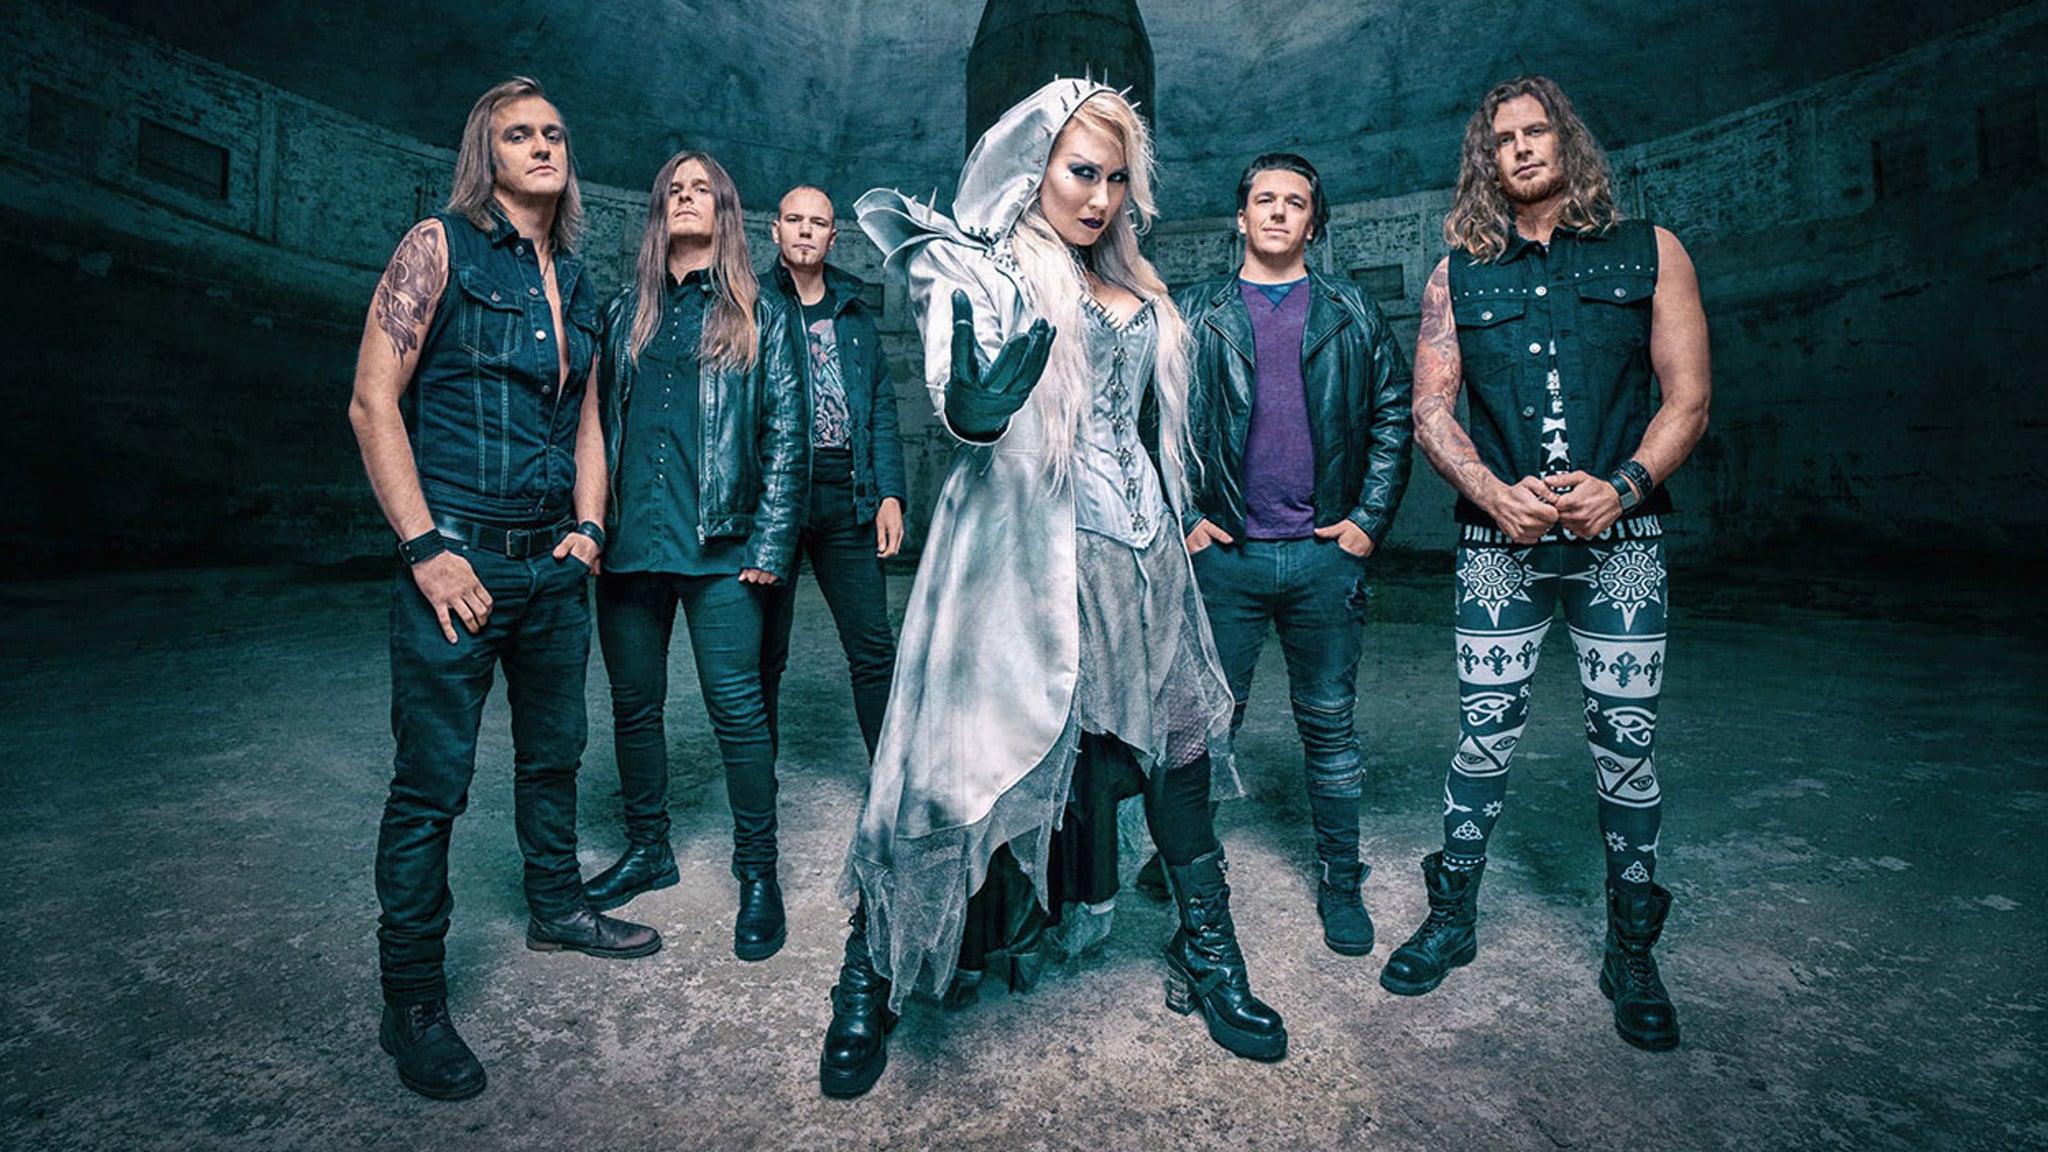 Battle Beast Circus Of Doom Over North America presale password for show tickets in Minneapolis, MN (Varsity Theater)